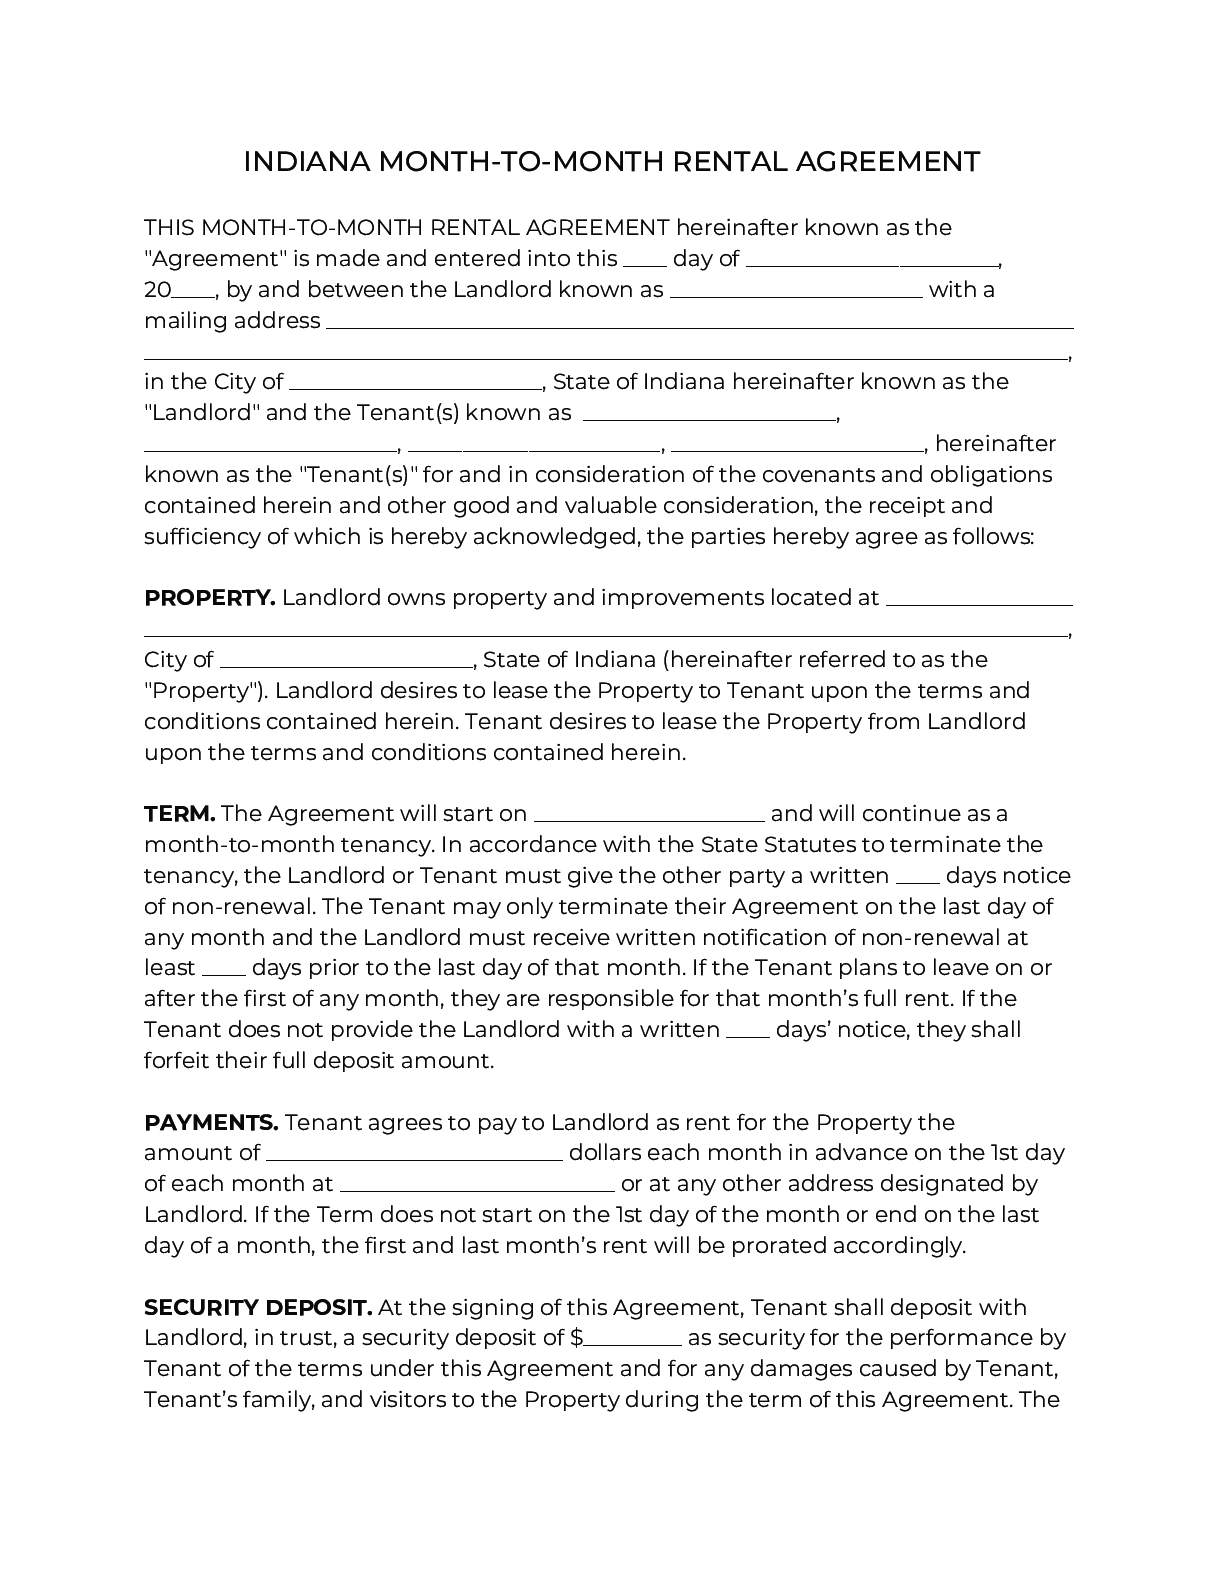 official indiana month to month rental agreement 2020 pdf form